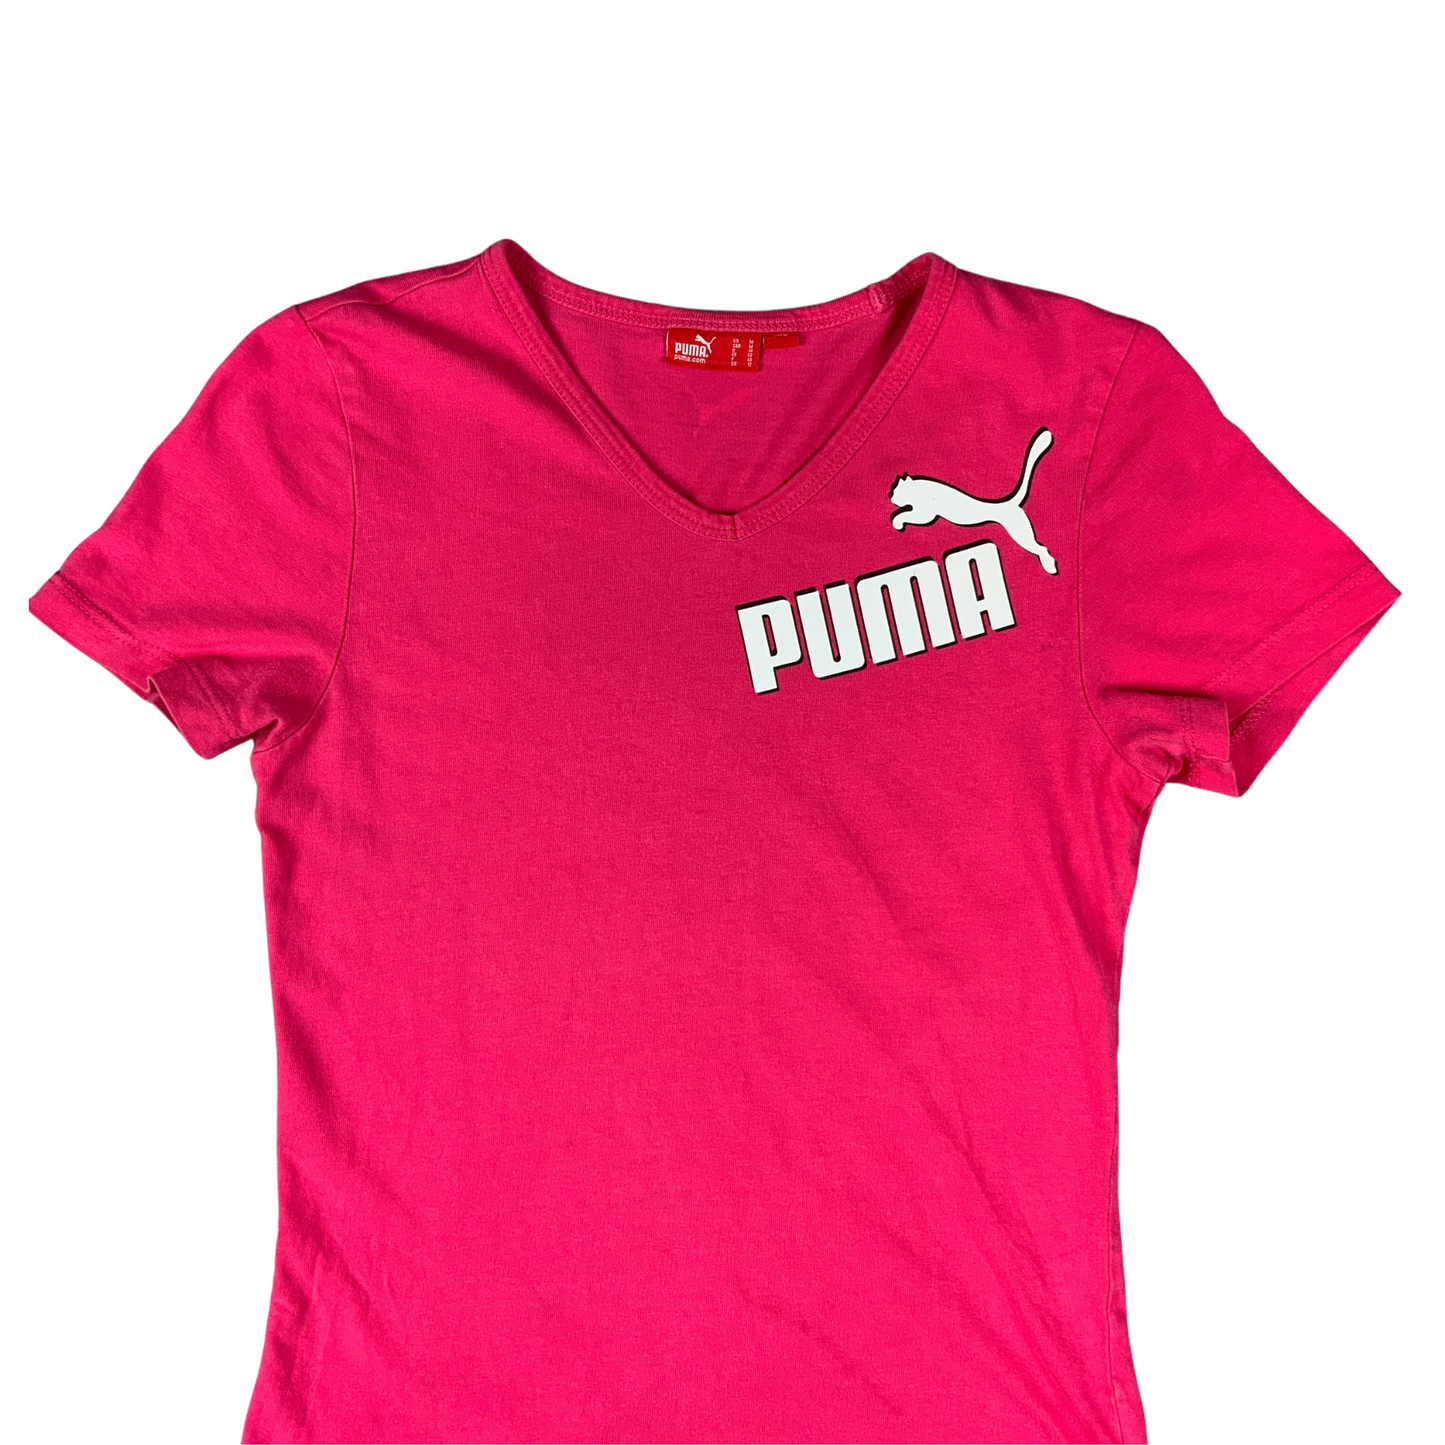 Vintage 90s Hot Pink Puma Sports Baby Tee 8 10